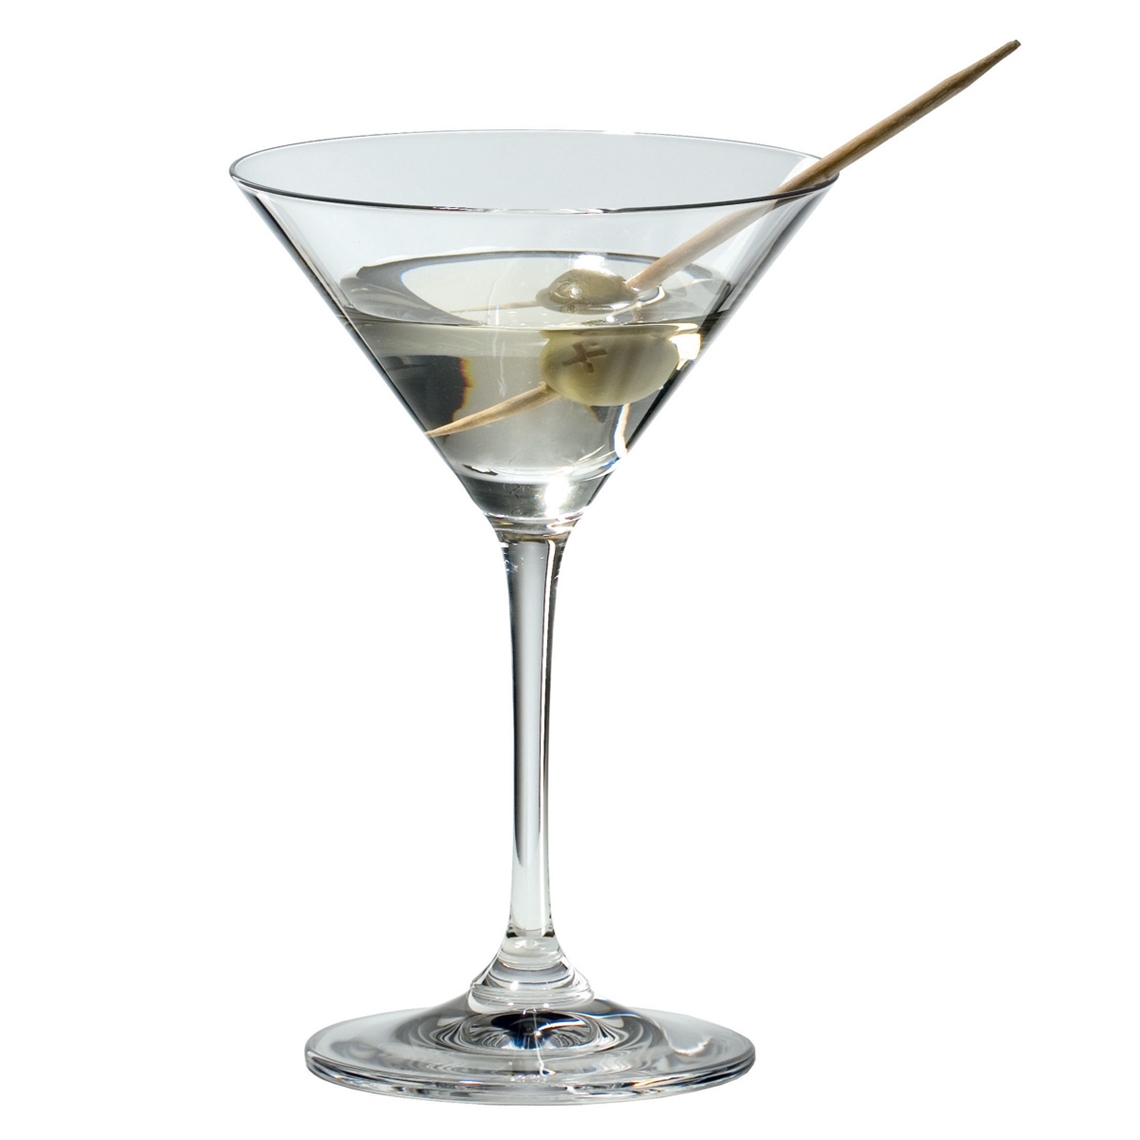 View more water glasses / tumblers from our Martini Glasses range